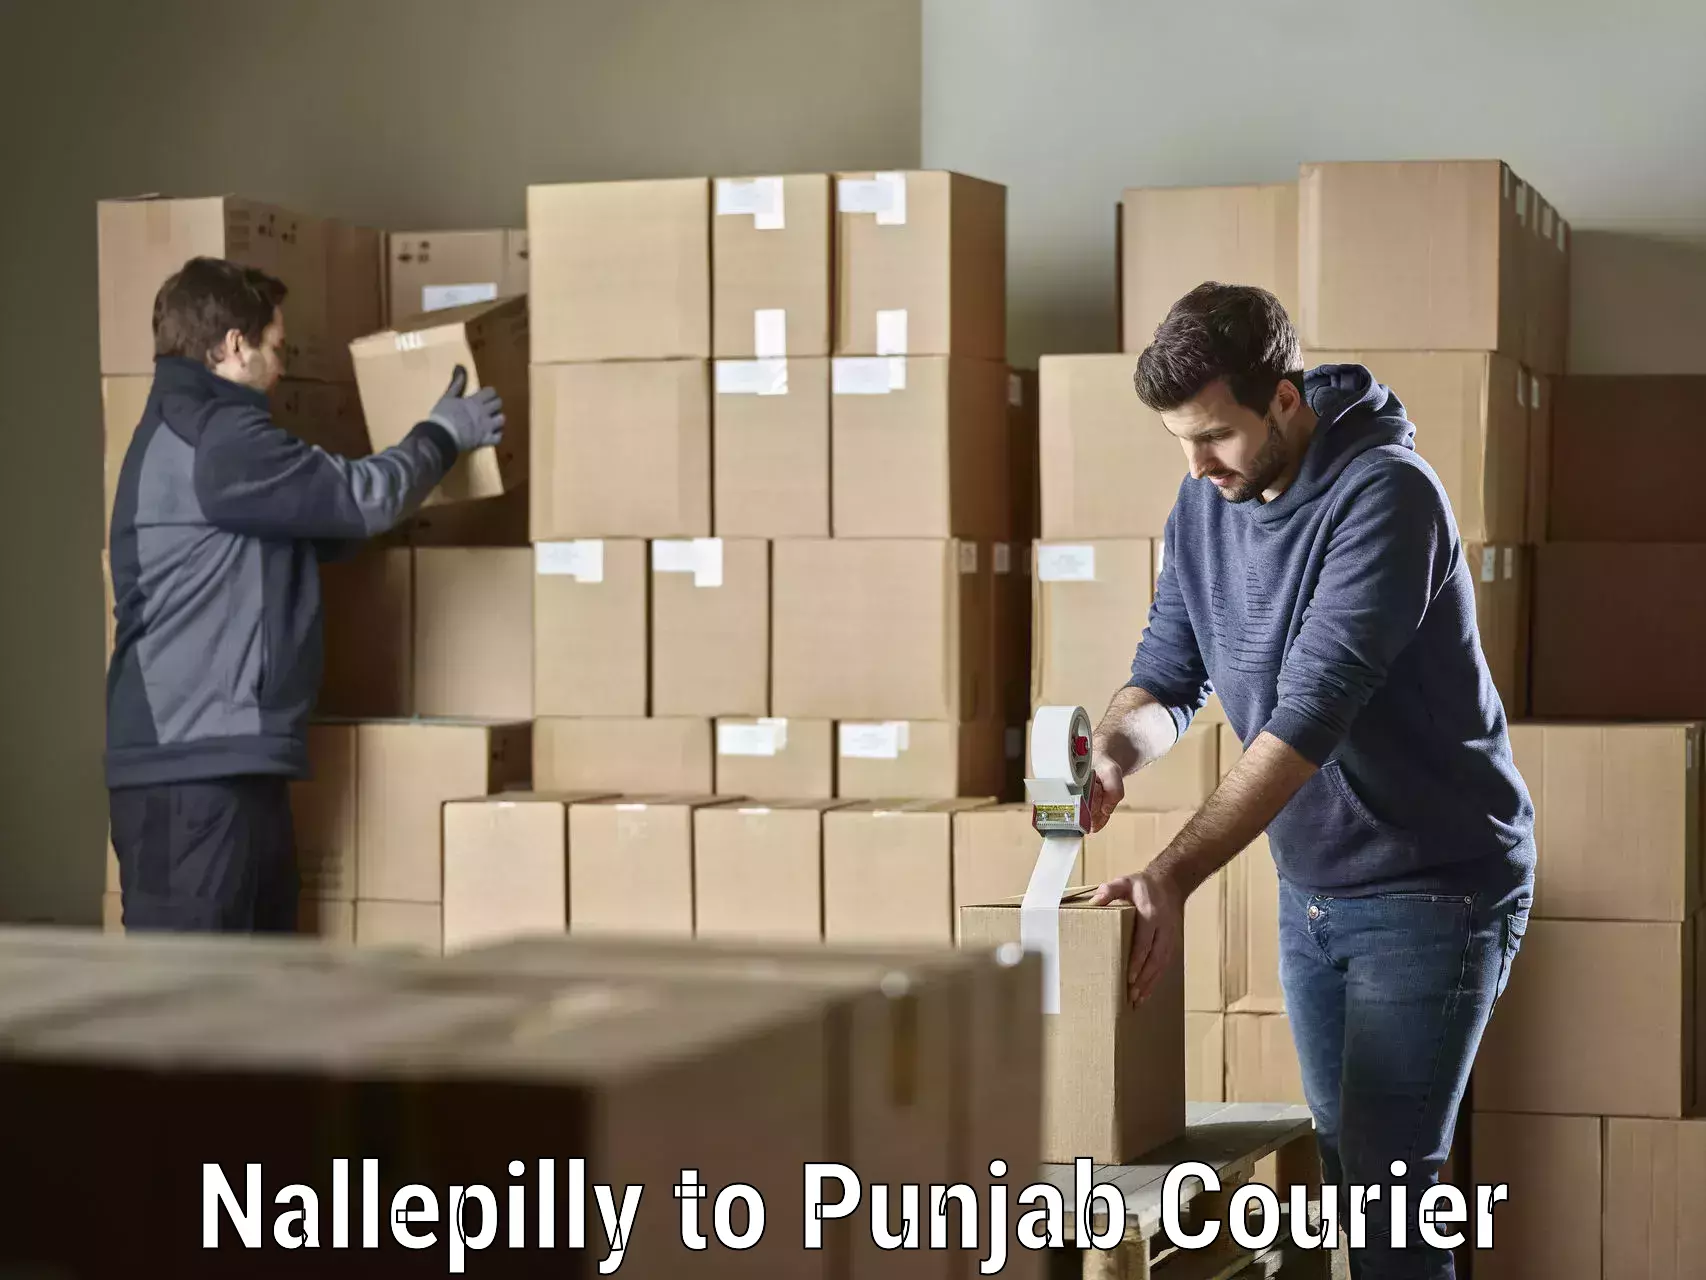 Urgent courier needs in Nallepilly to Punjab